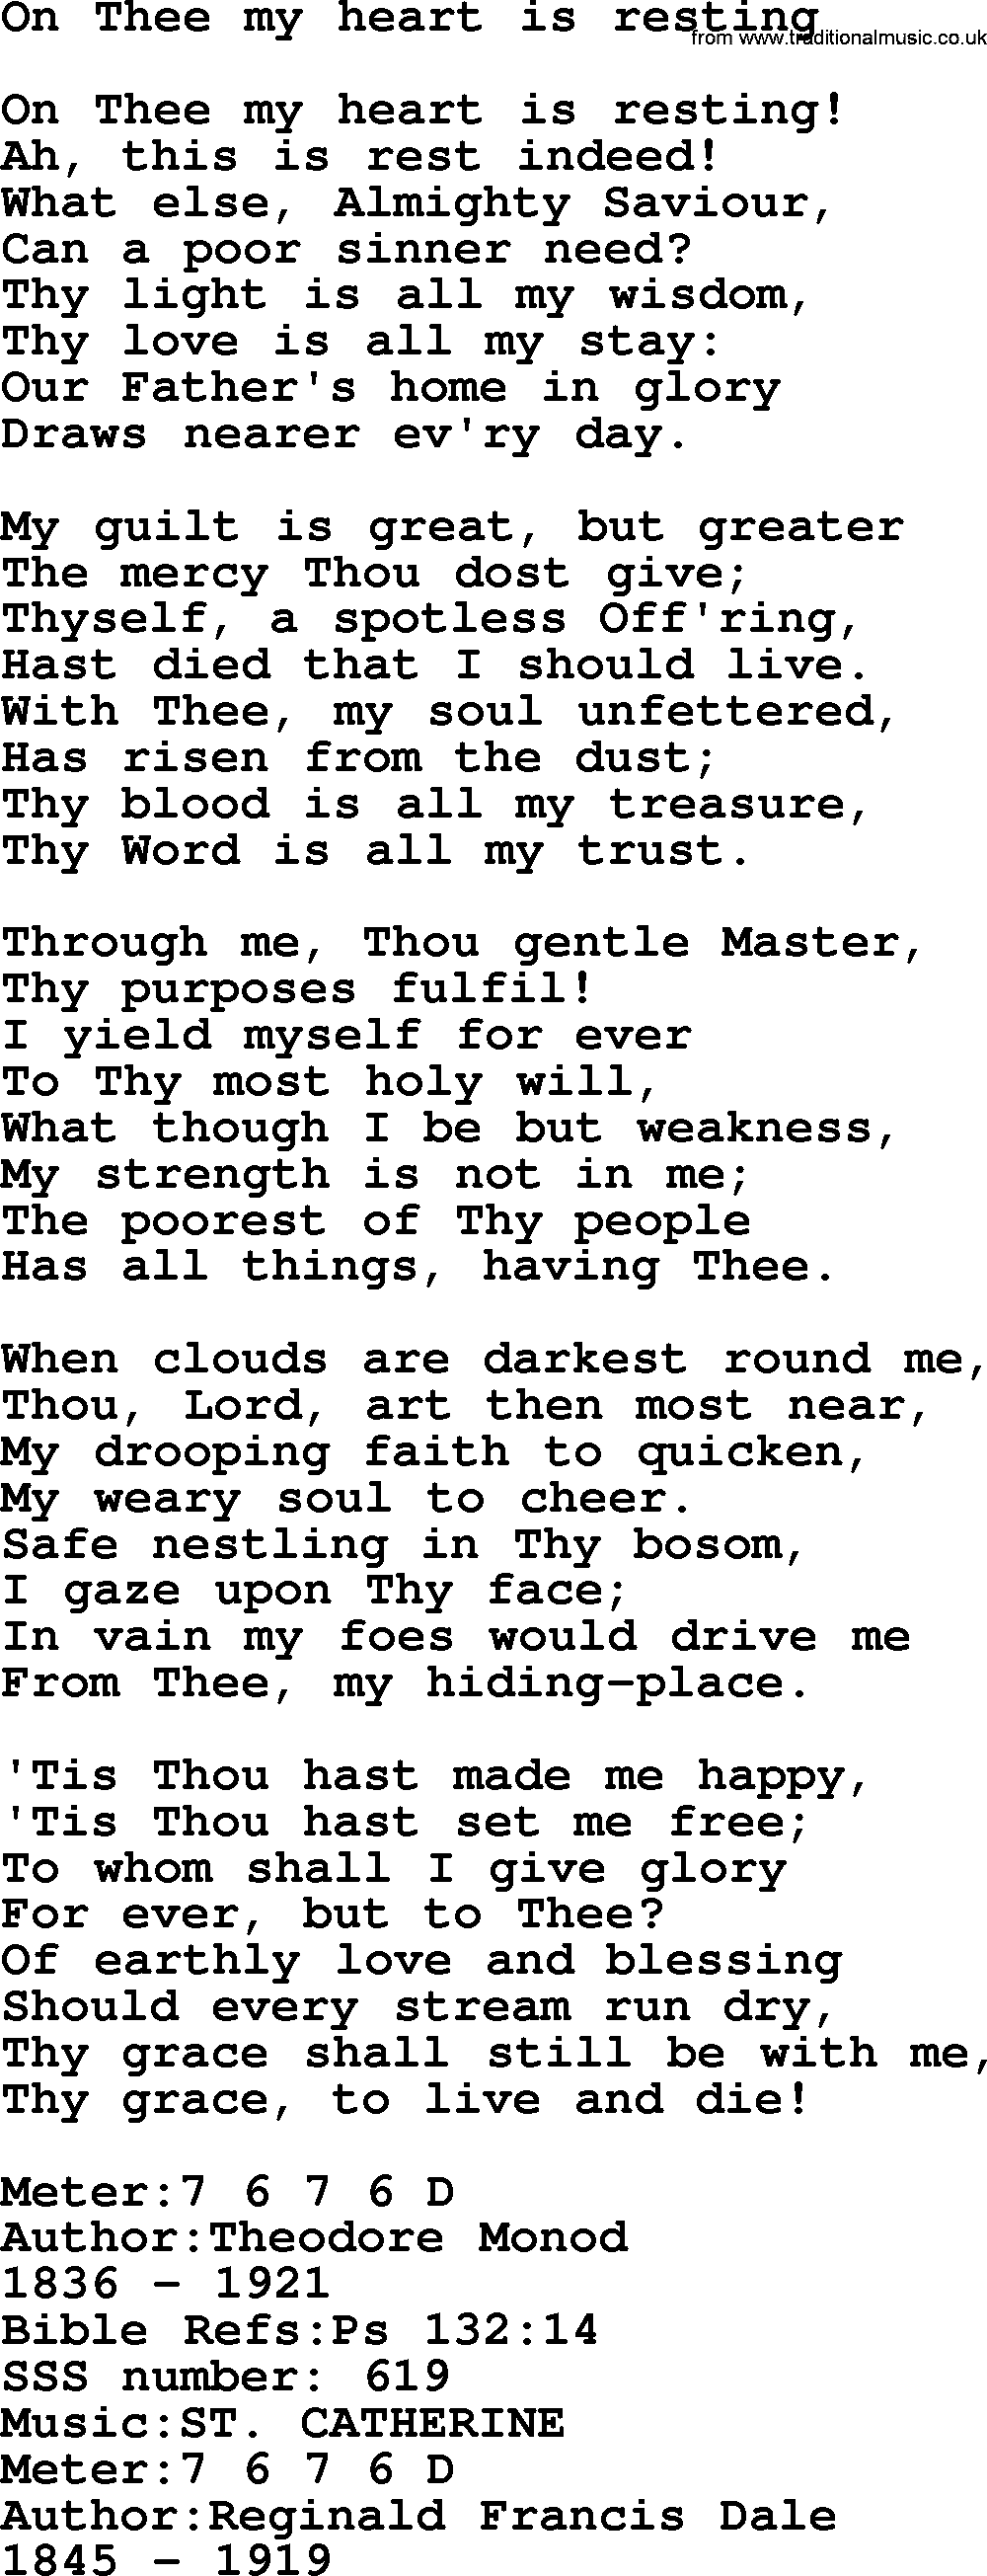 Sacred Songs and Solos complete, 1200 Hymns, title: On Thee My Heart Is Resting, lyrics and PDF